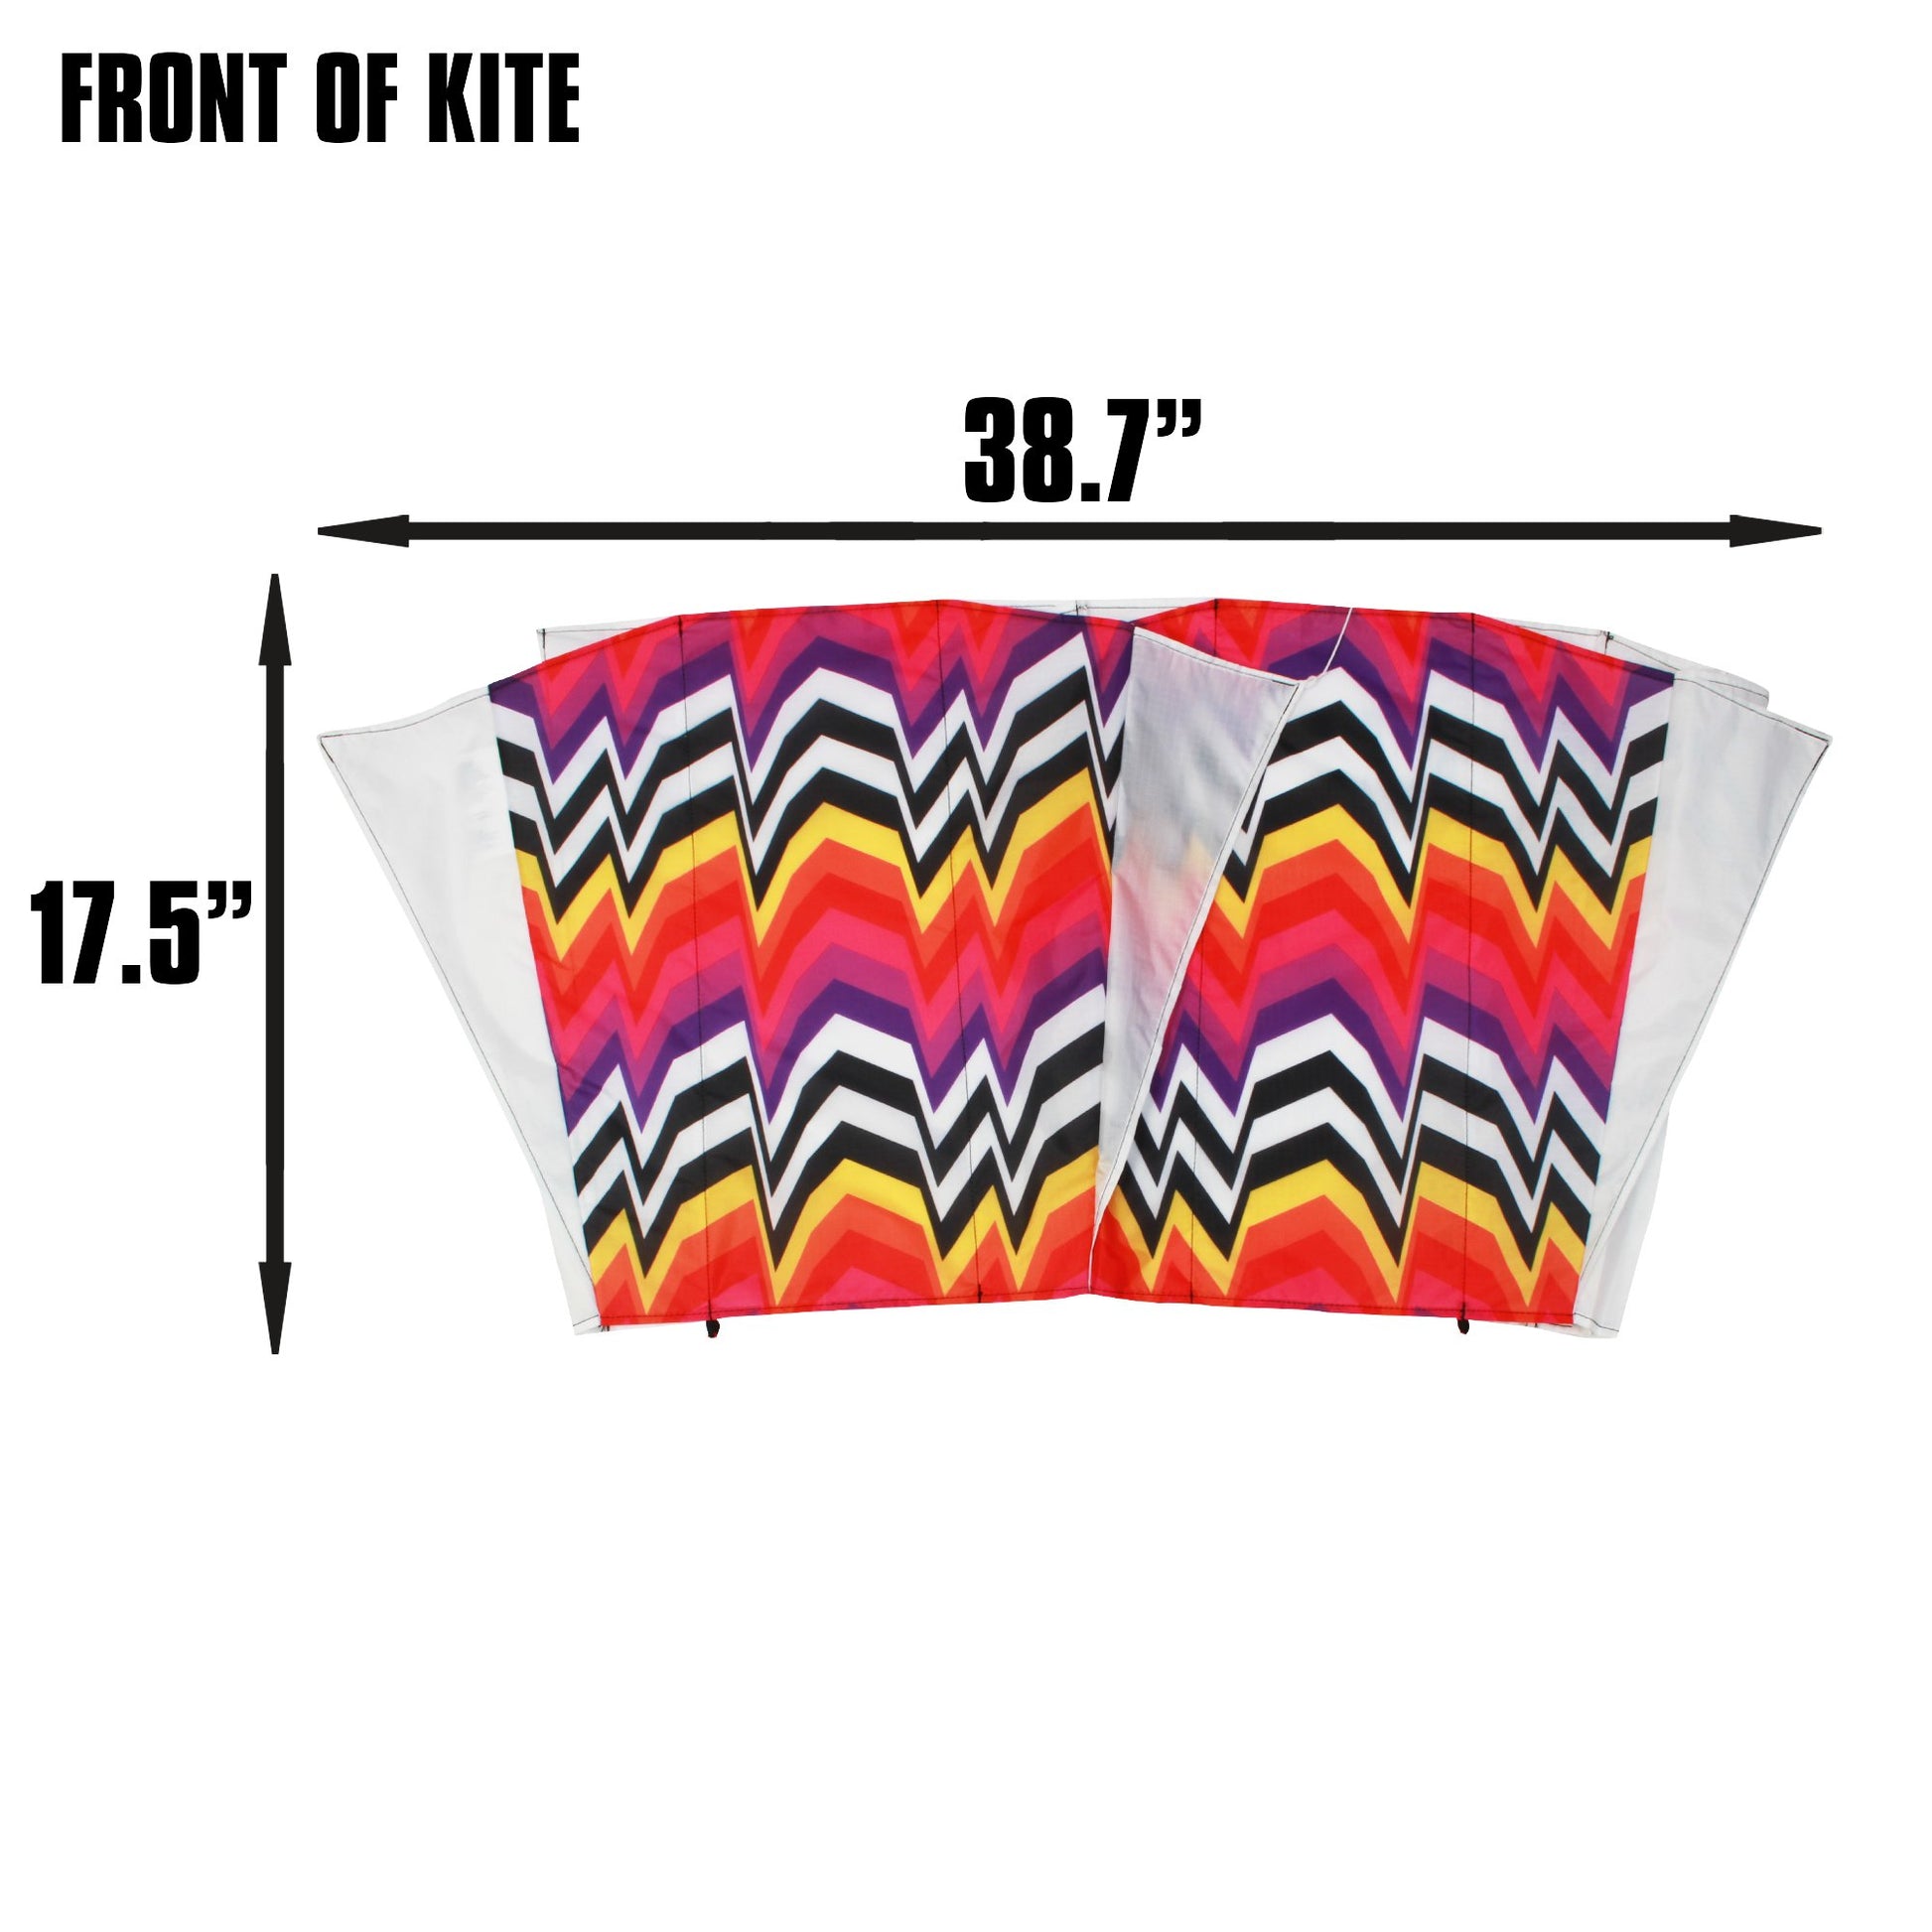 X Kites SkyFoil ZigZag + Pocket Kite Isometric Parafoil Kite Bundle - No Assembly Required packaging and contents